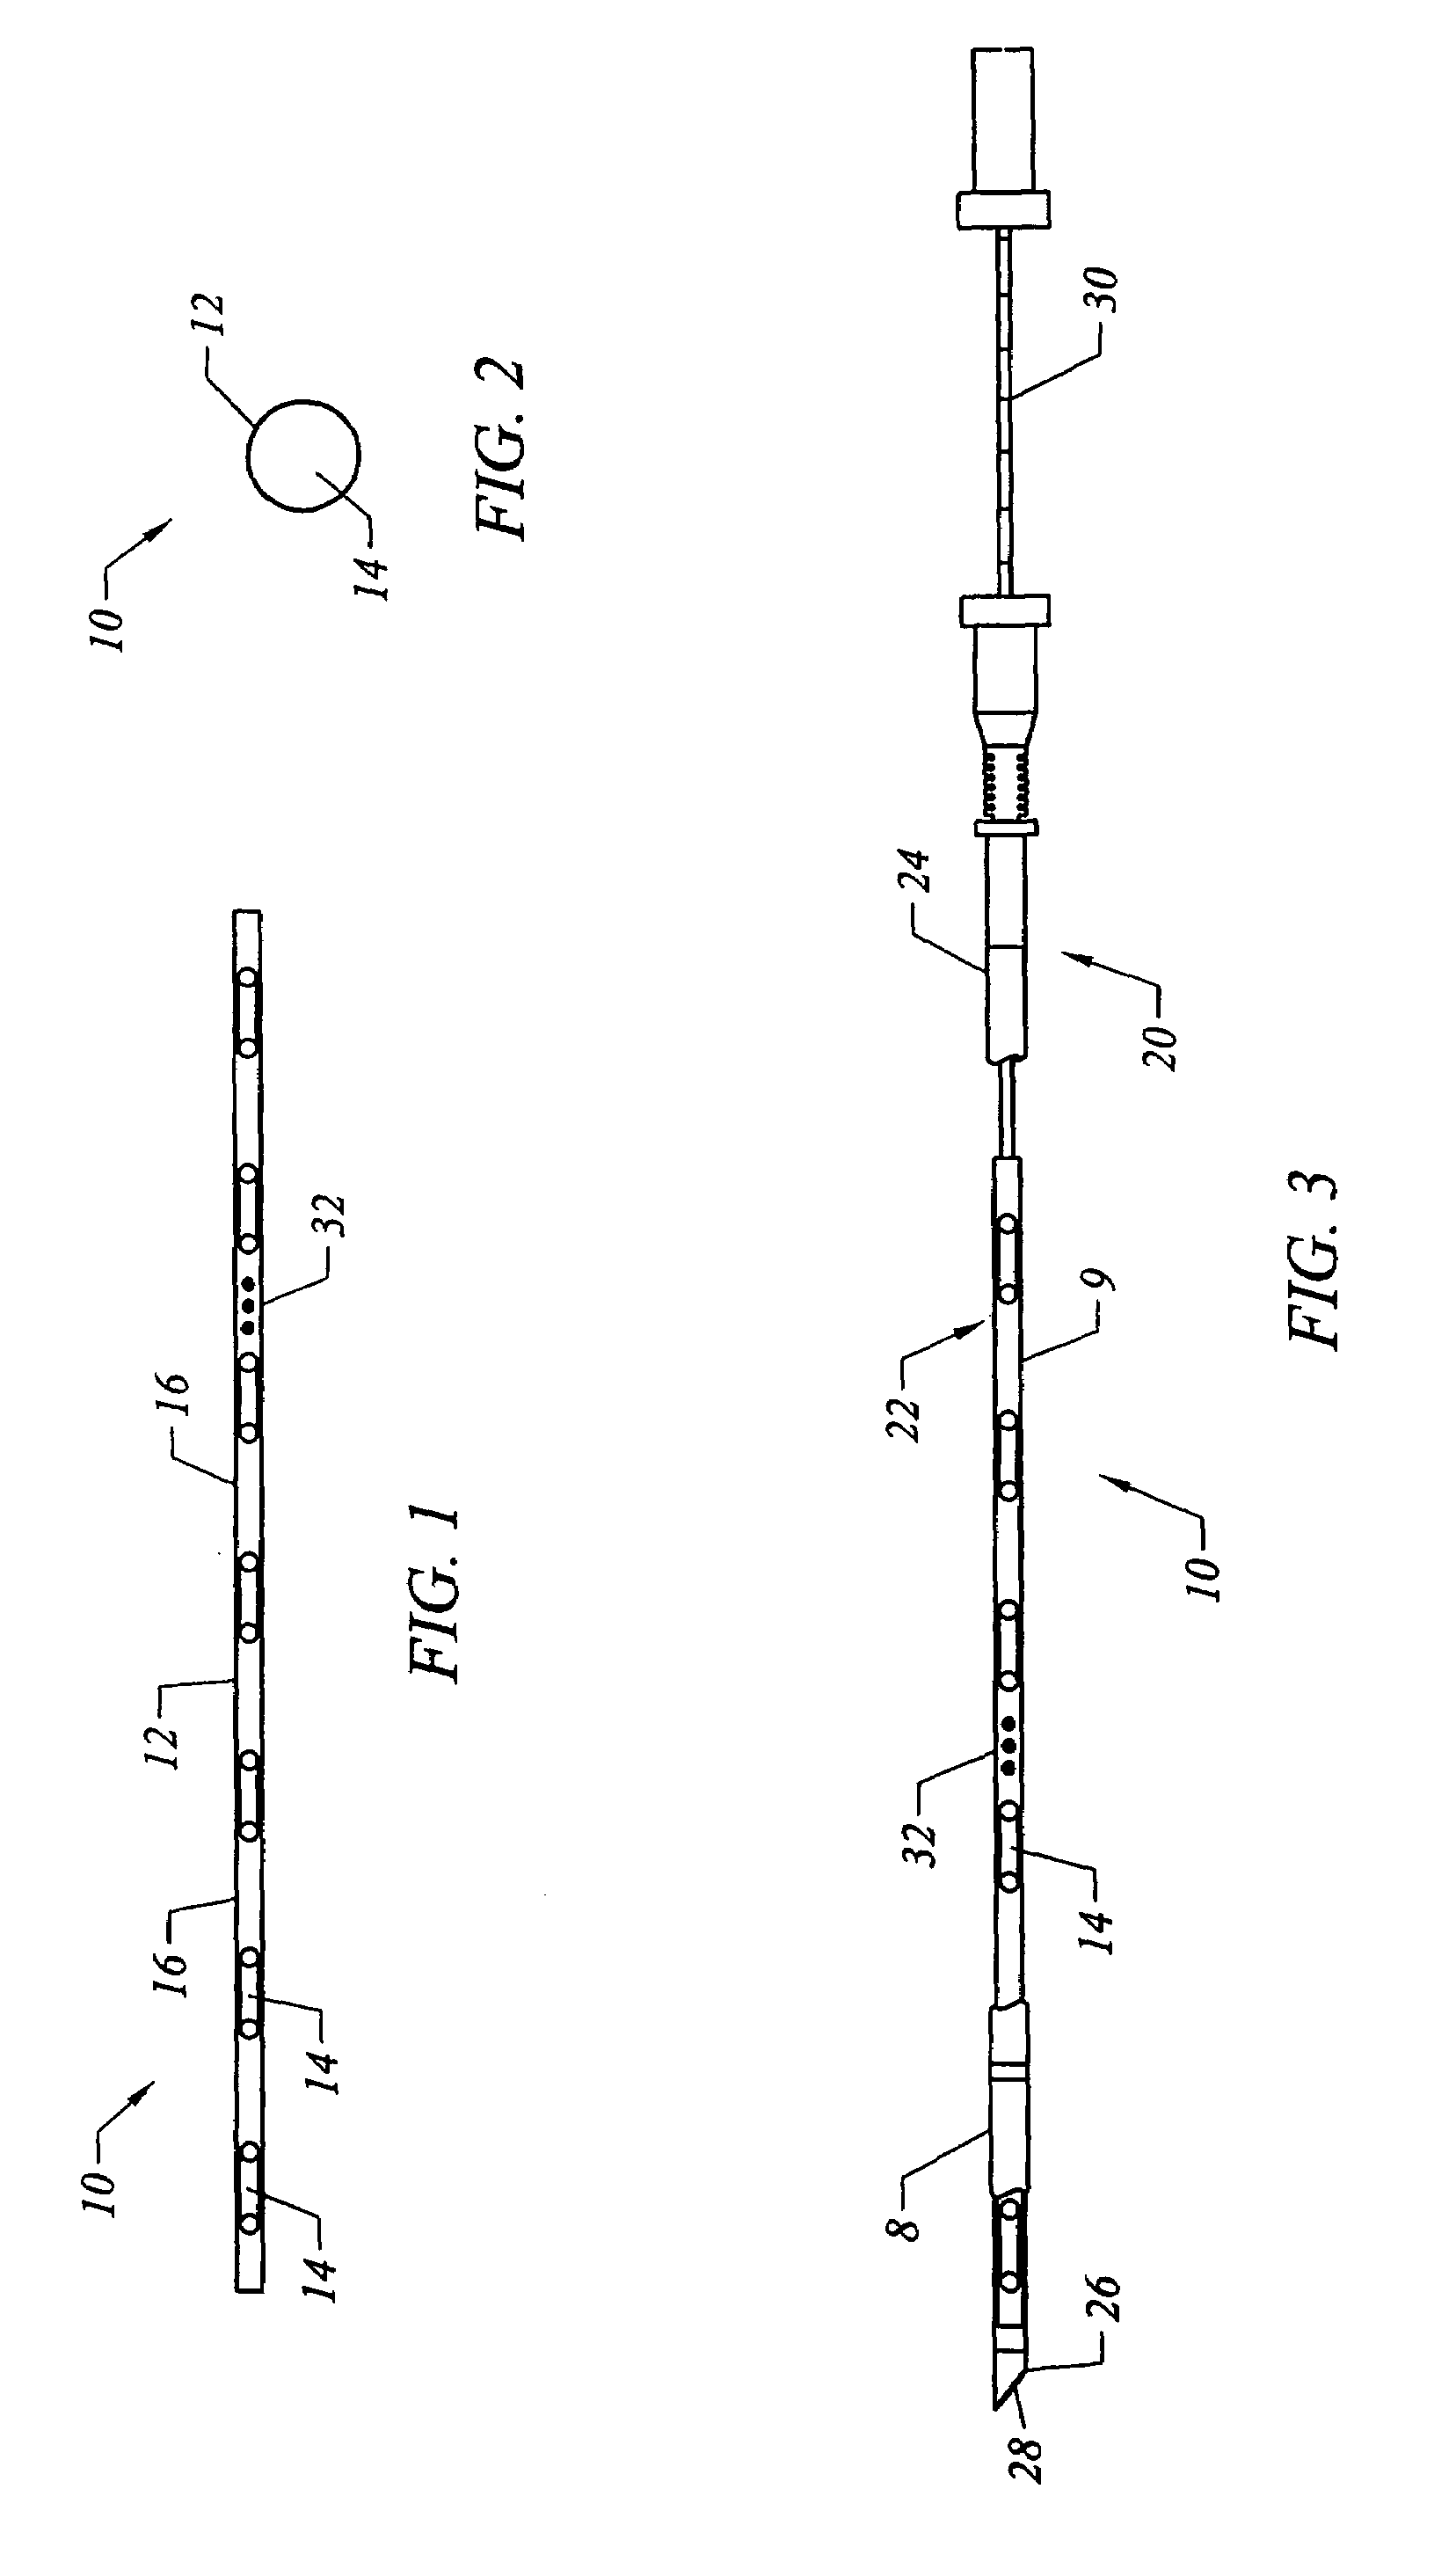 Delivery system and method for interstitial radiation therapy using seed strands with custom end spacing